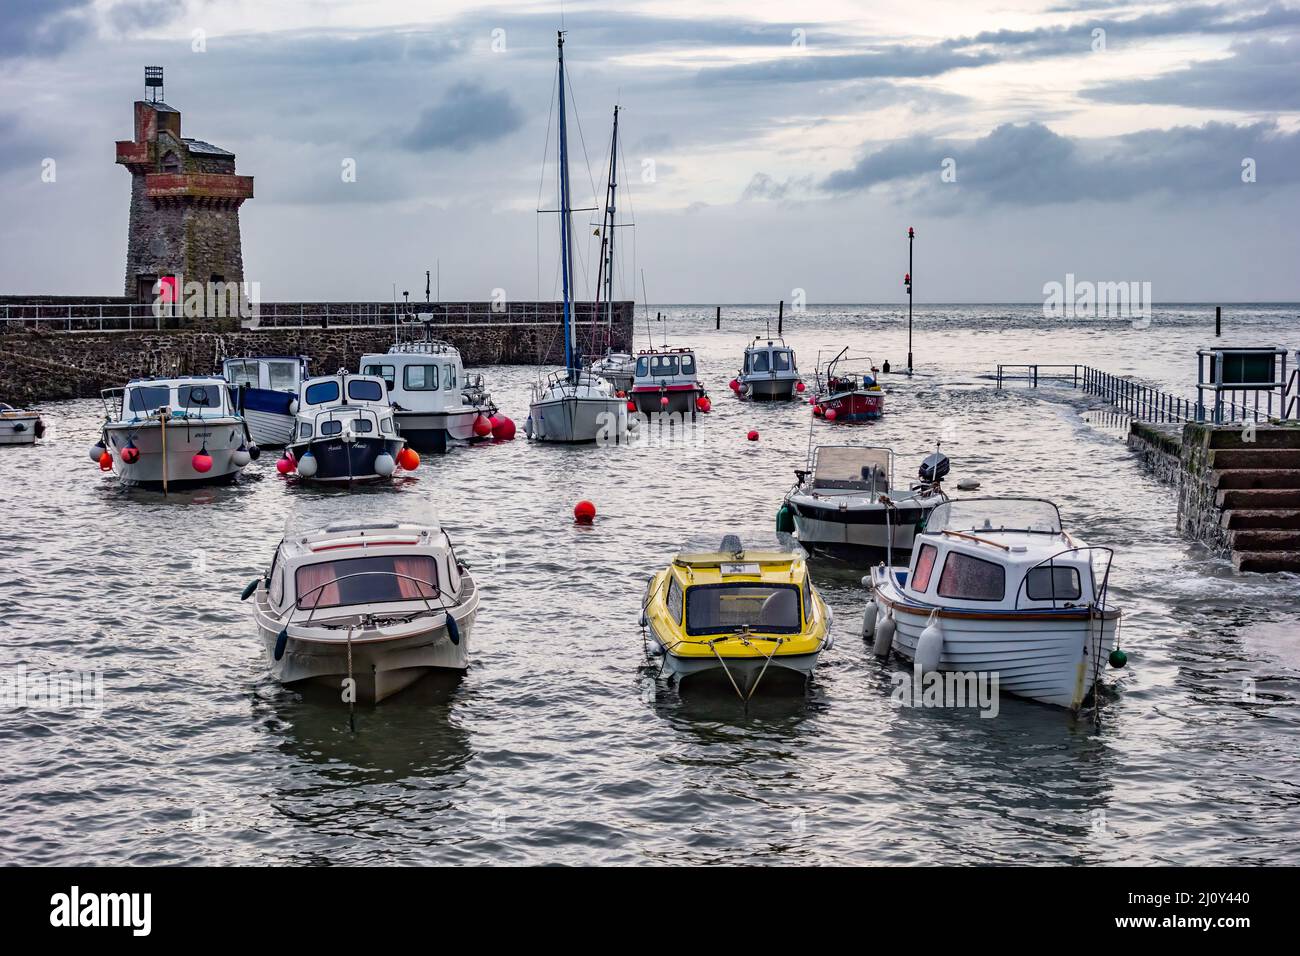 LYNMOUTH, DEVON, UK - OCTOBER 20 : View of the harbour in Lynmouth, Devon on October 20, 2013 Stock Photo